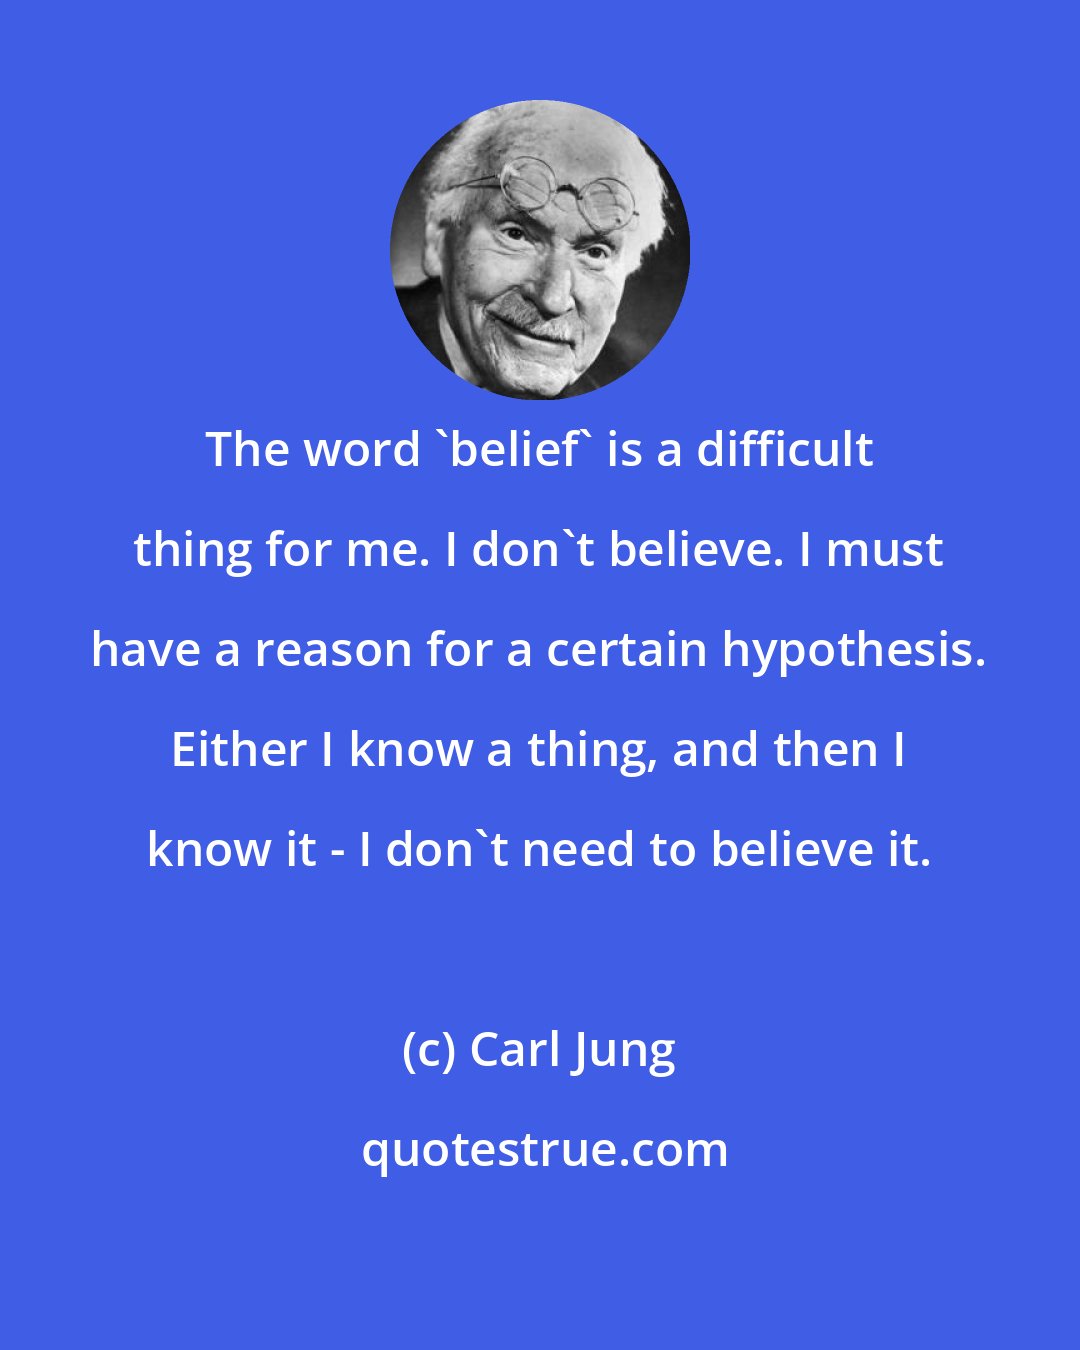 Carl Jung: The word 'belief' is a difficult thing for me. I don't believe. I must have a reason for a certain hypothesis. Either I know a thing, and then I know it - I don't need to believe it.